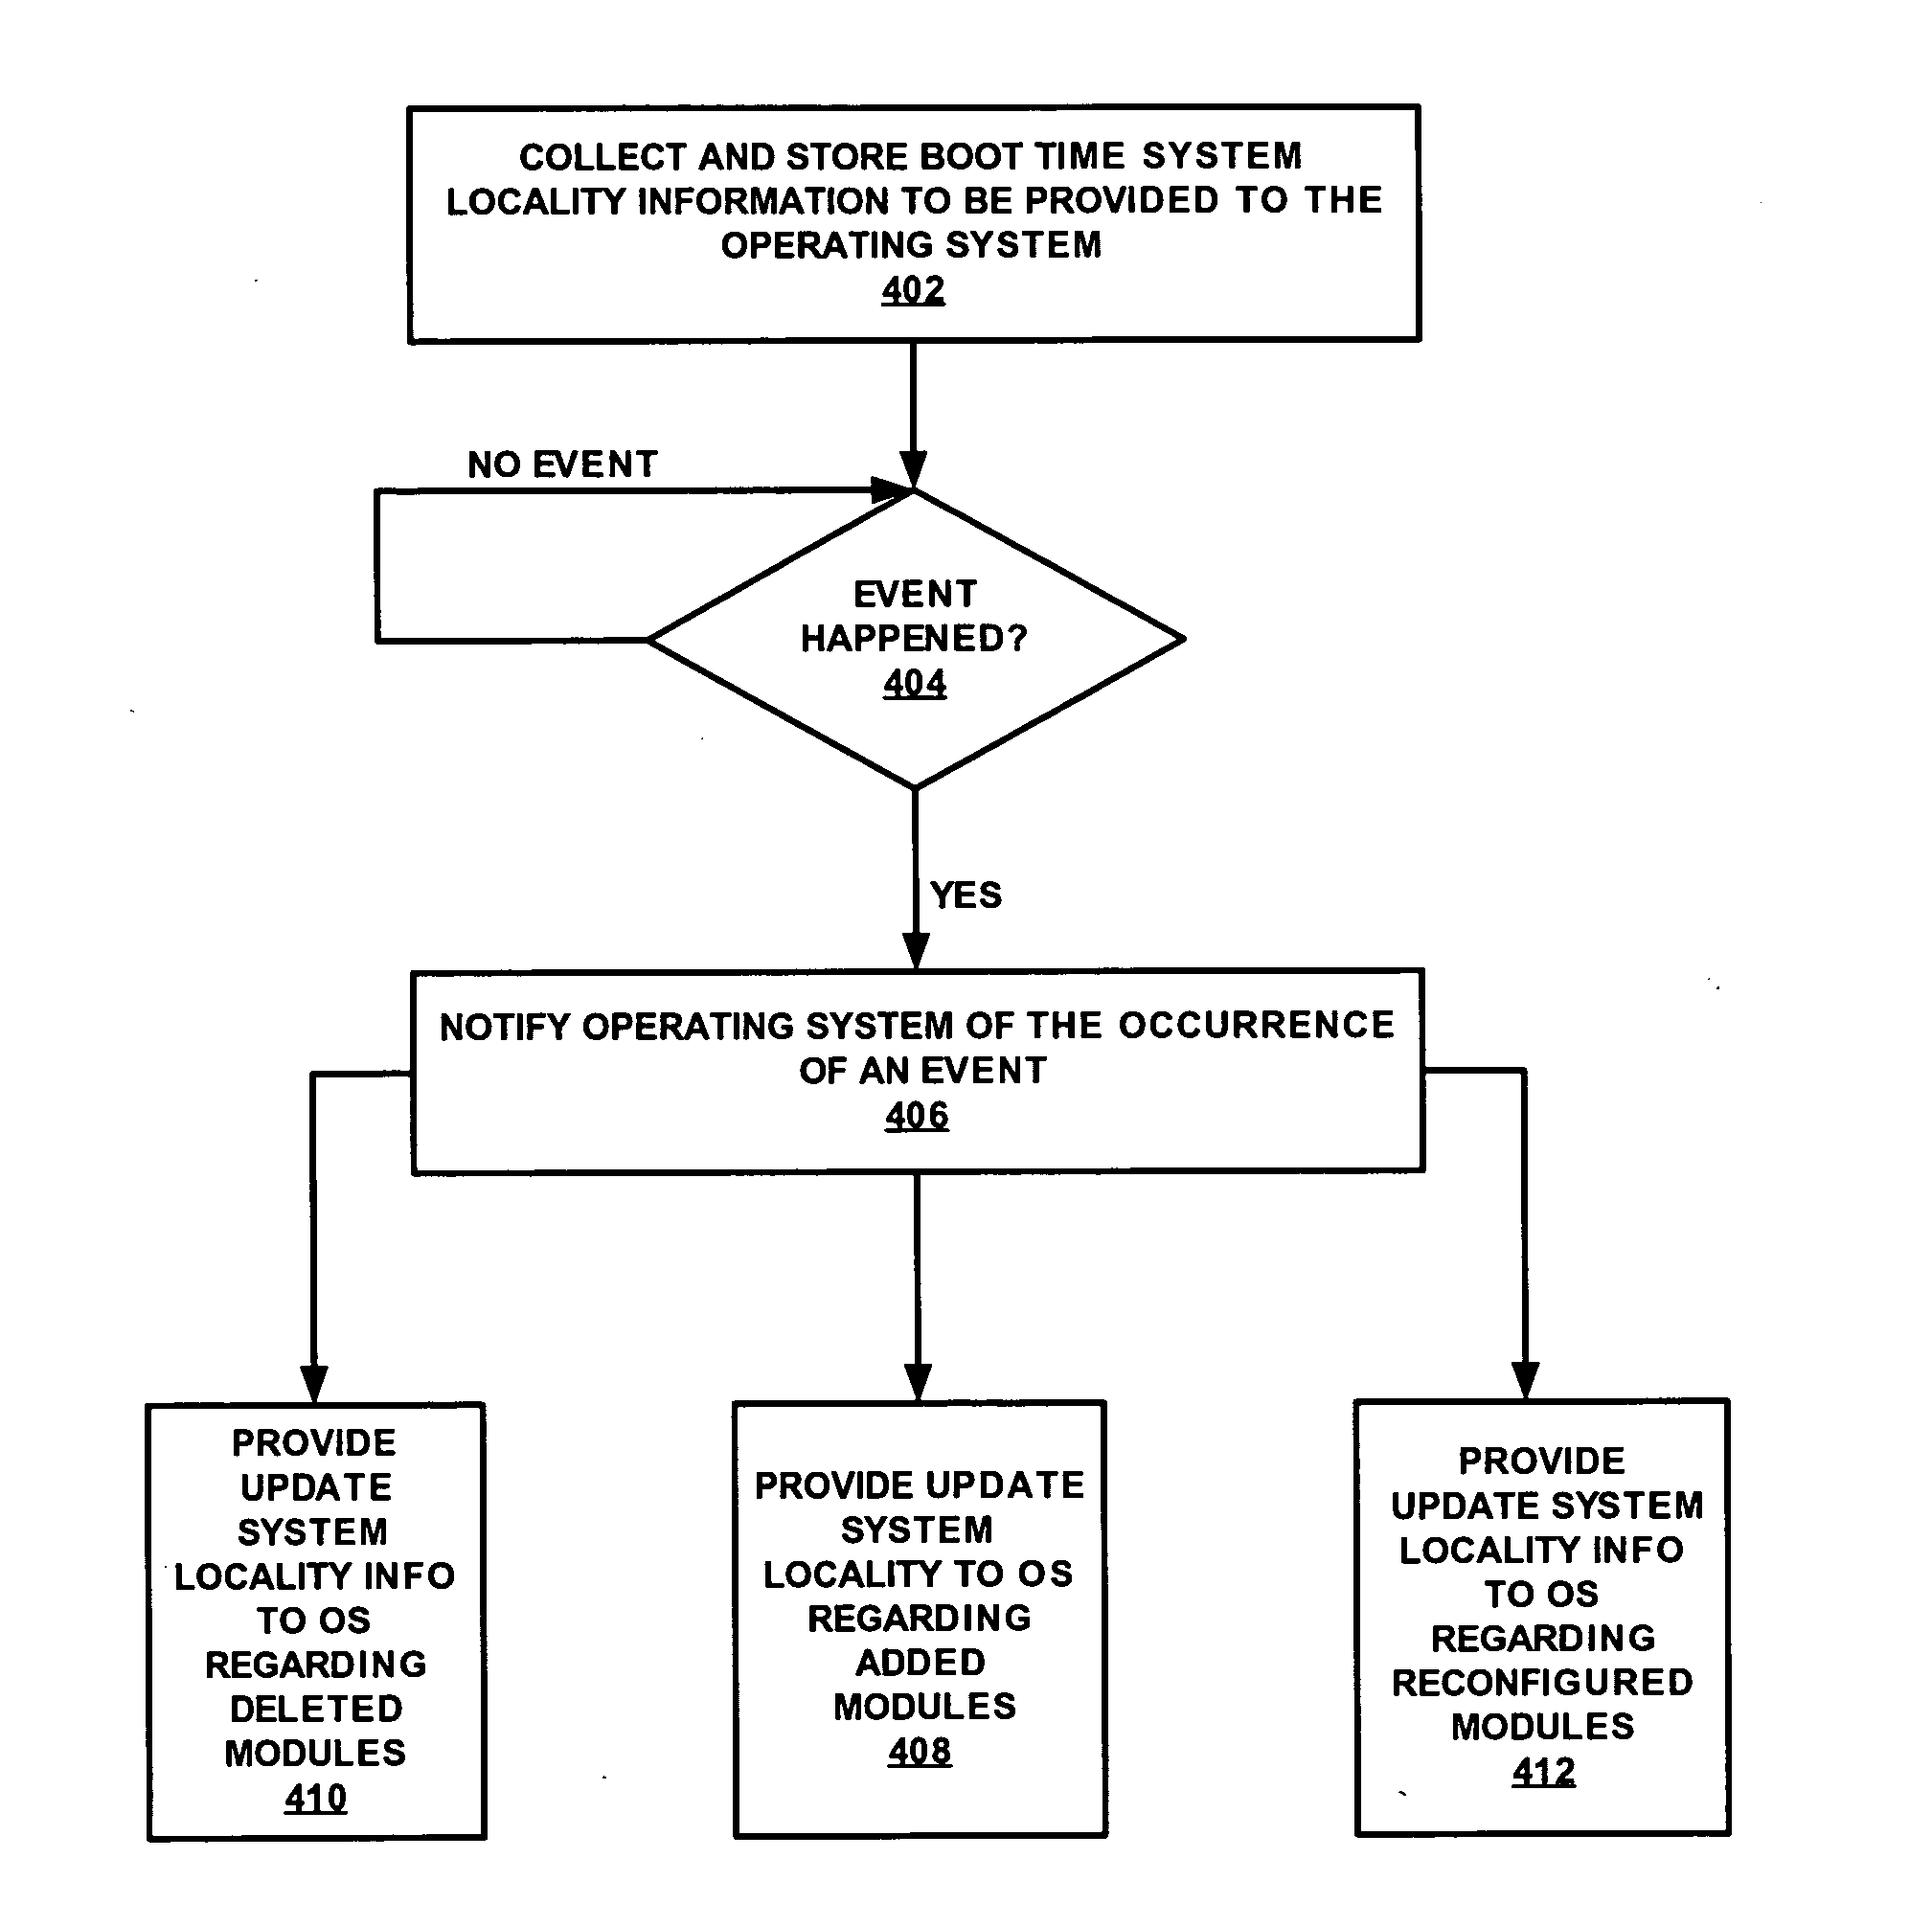 Method and apparatus for providing updated system locality information during runtime